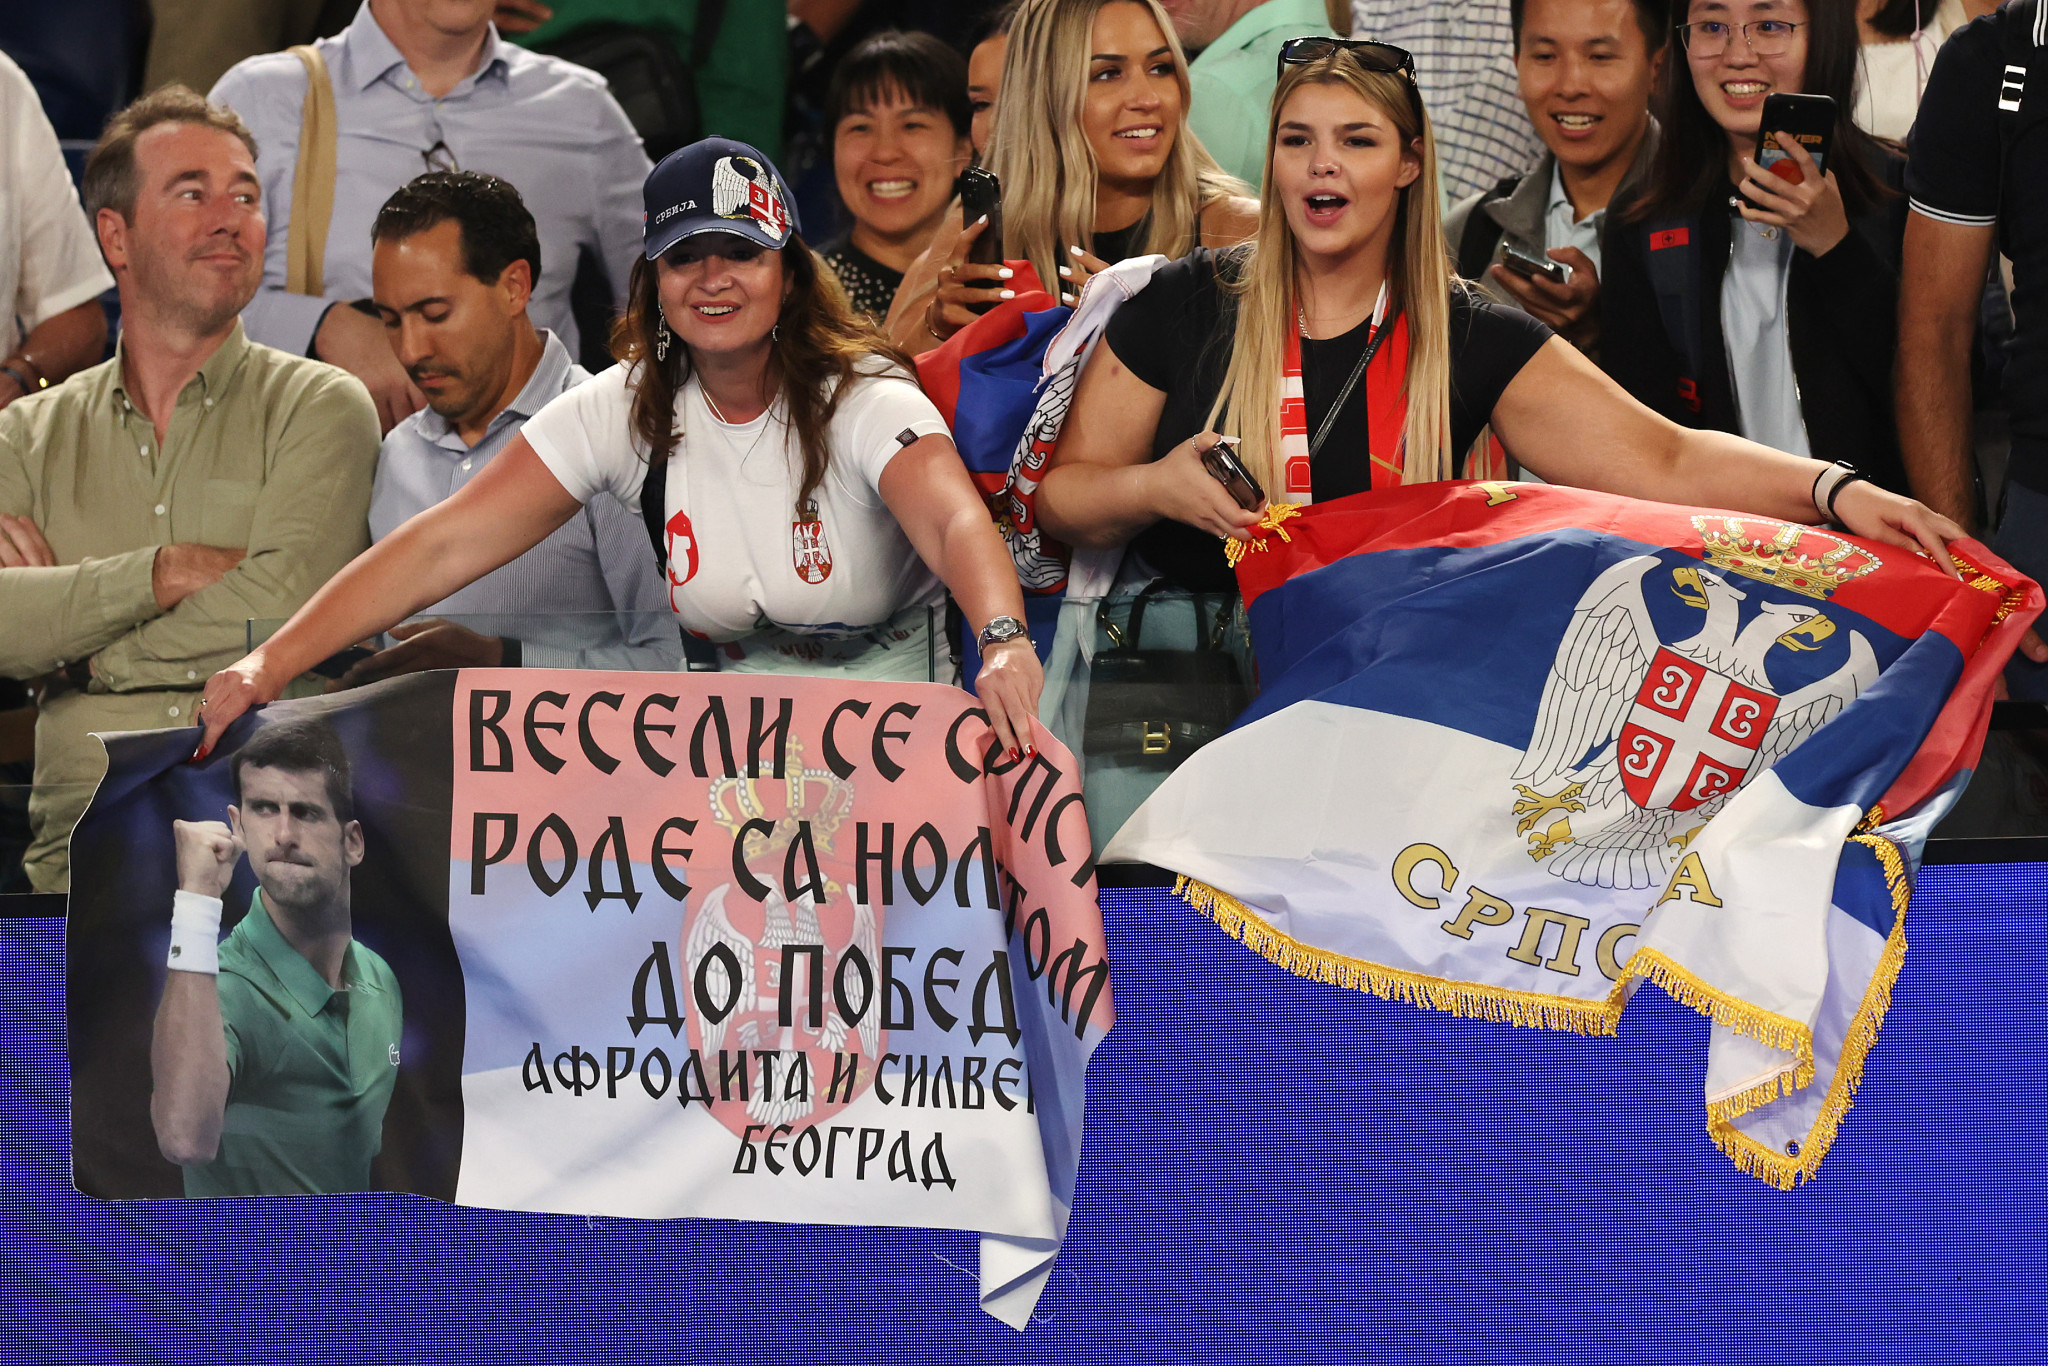 The Serbian fans were out in force to support Novak Djokovic in his semi-final against Paul  ©Getty Images